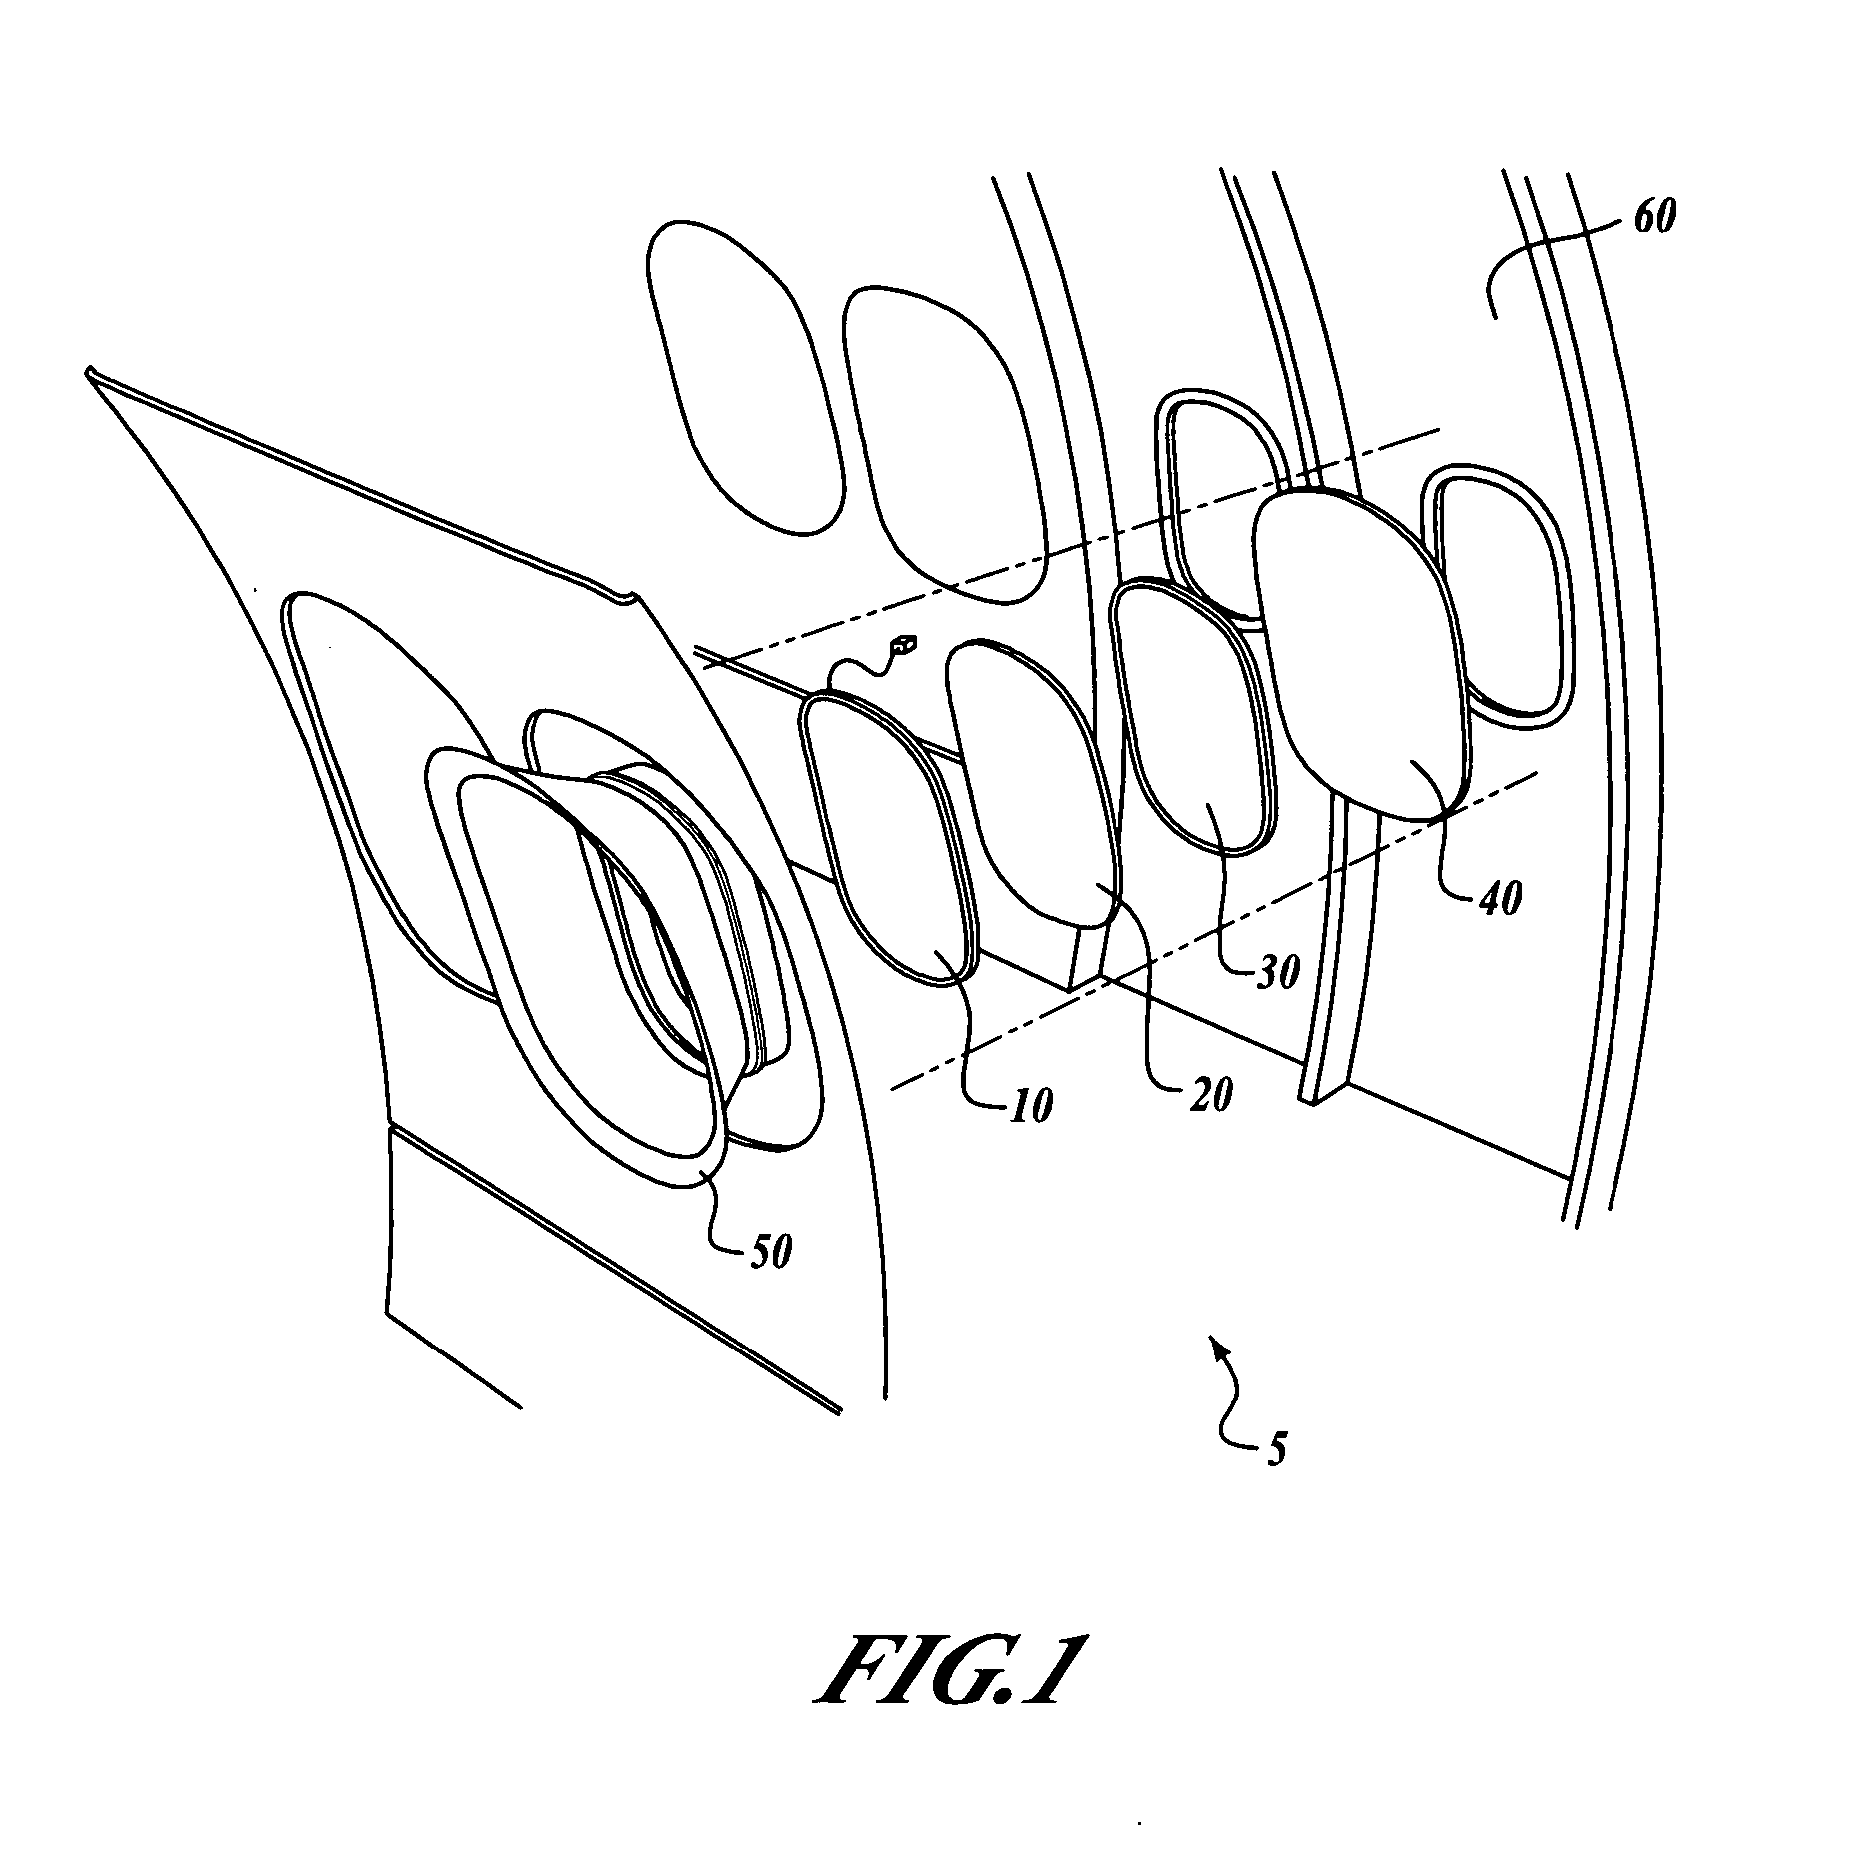 Low vapor pressure solvent for electrochromic devices